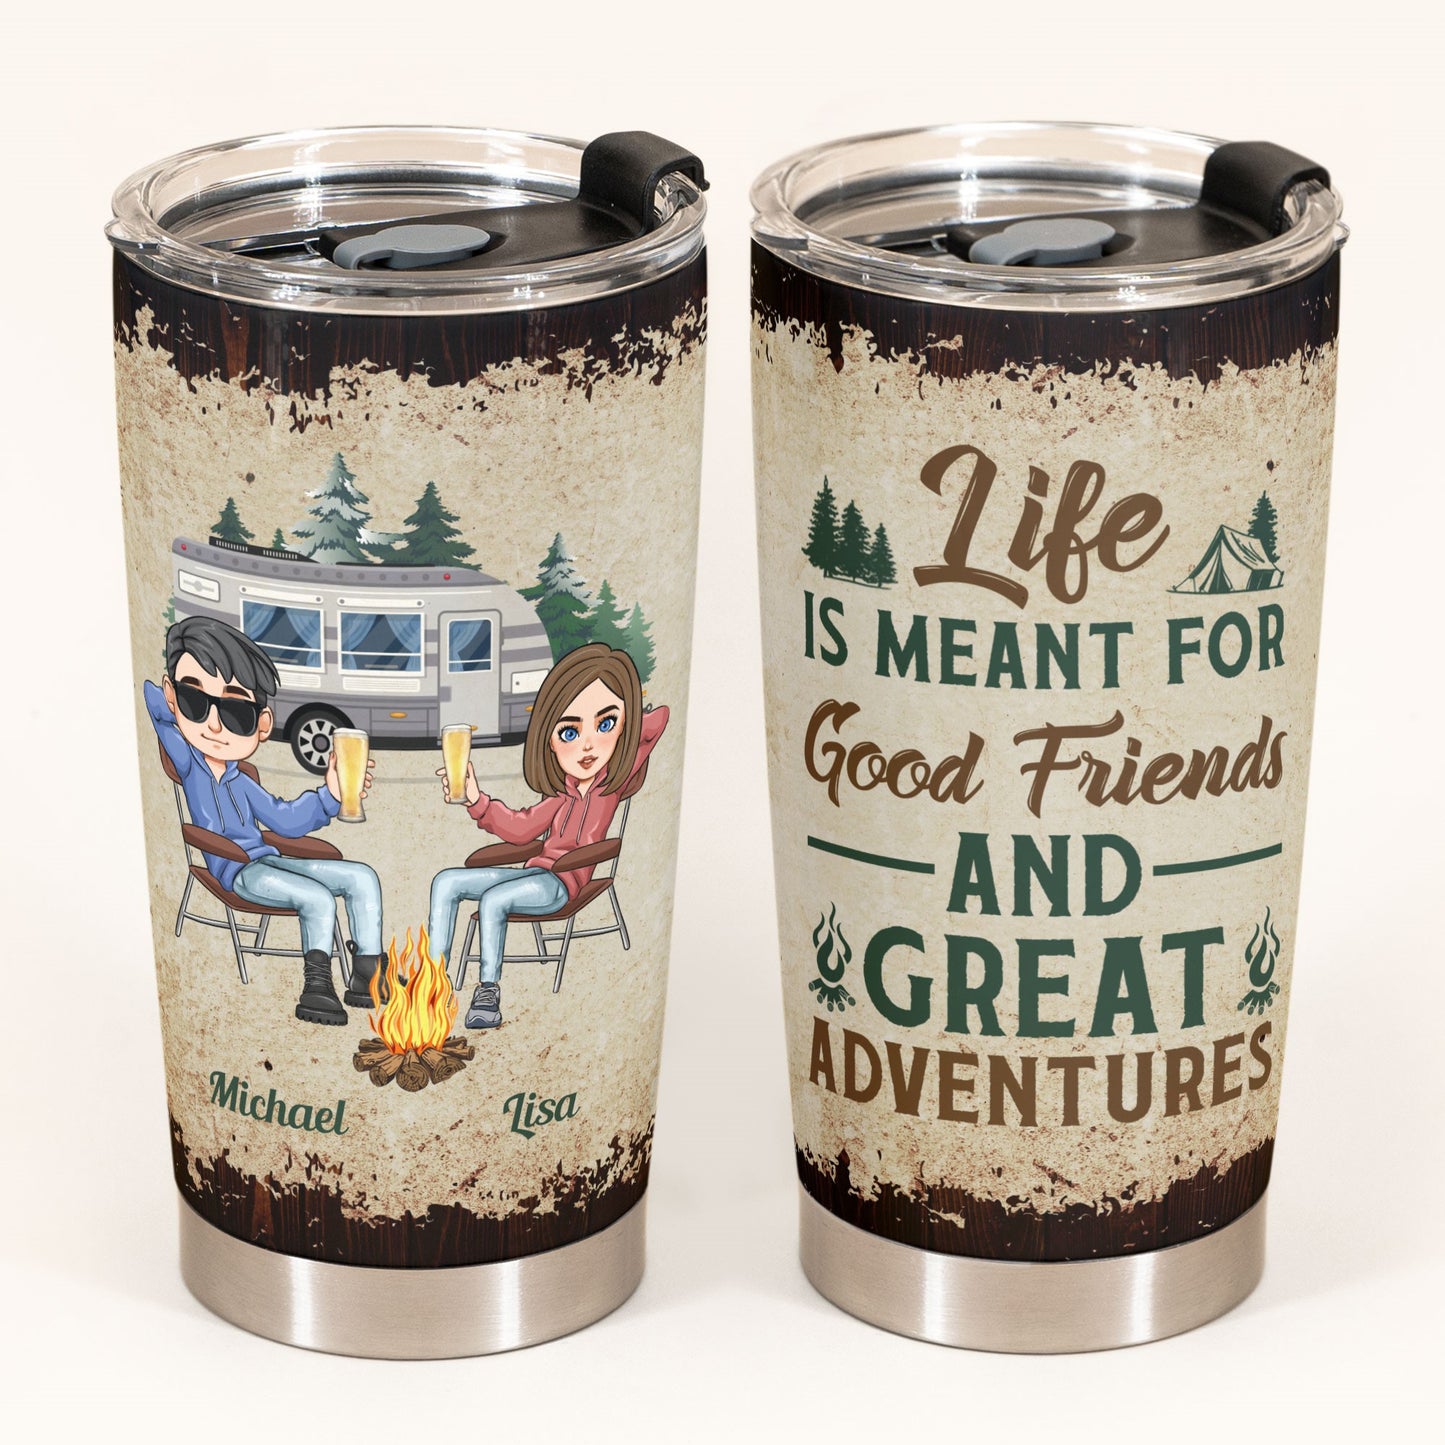 Life Is Meant For Good Friends And Great Adventures - Personalized Tumbler Cup - Birthday, Christmas Gift For Camping Friends